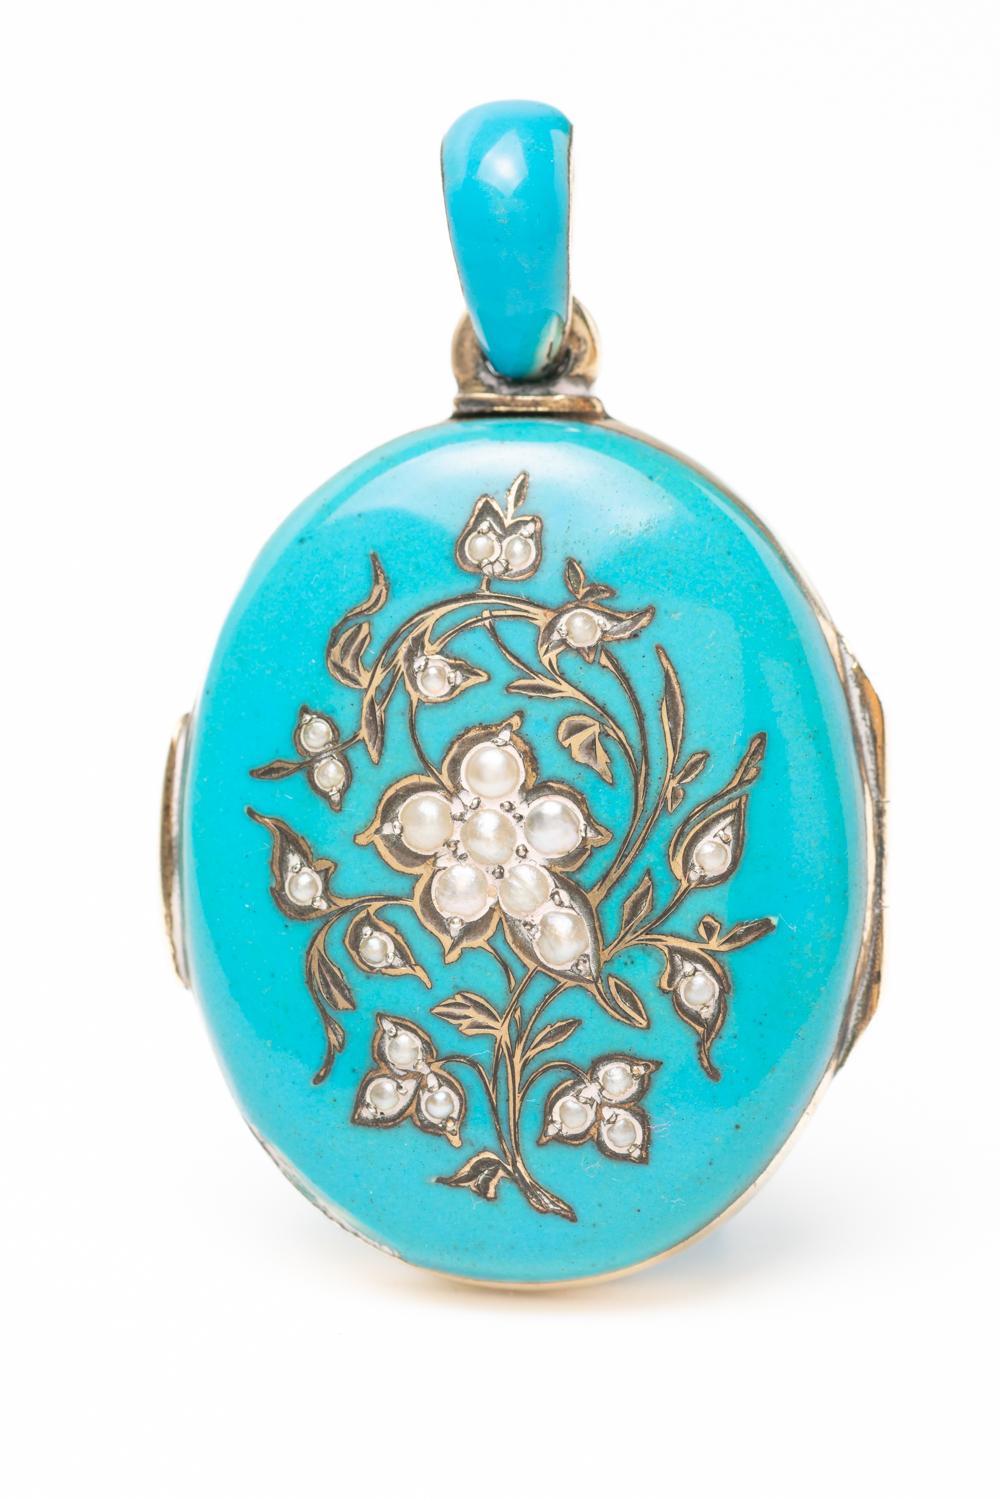 A 19th century Austrian-Hungarian silver and blue enamel oval locket with forget me not motif. The front of the piece depicting beautiful floral composition made with a 'forget me not ' flower in the centre set with natural seed pearls and a silver